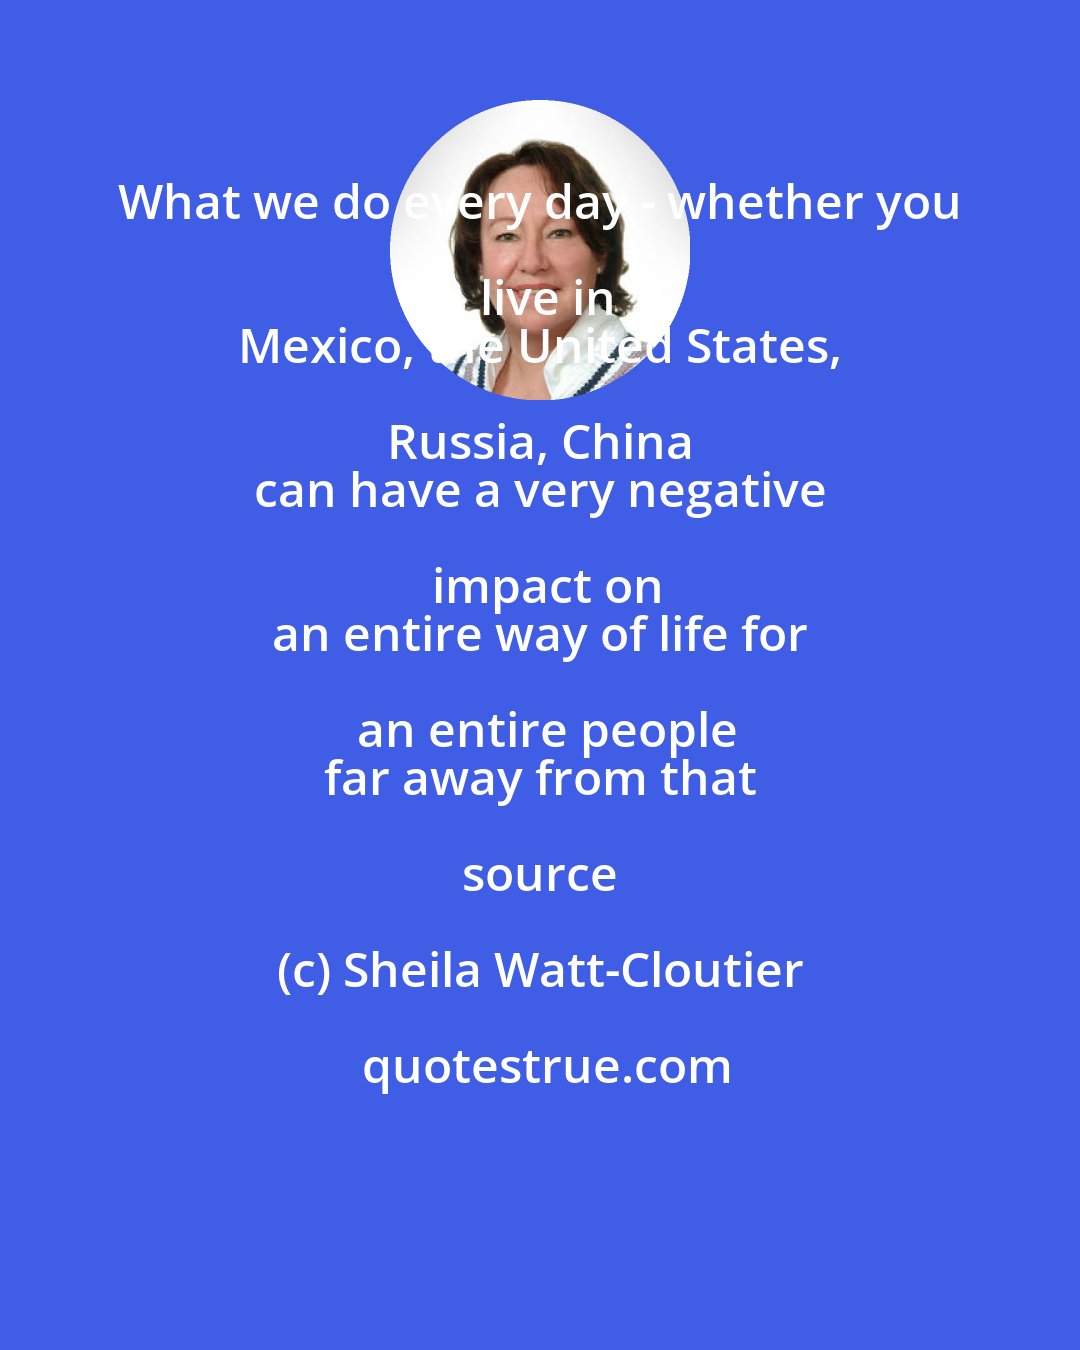 Sheila Watt-Cloutier: What we do every day - whether you live in
 Mexico, the United States, Russia, China 
 can have a very negative impact on
 an entire way of life for an entire people
 far away from that source